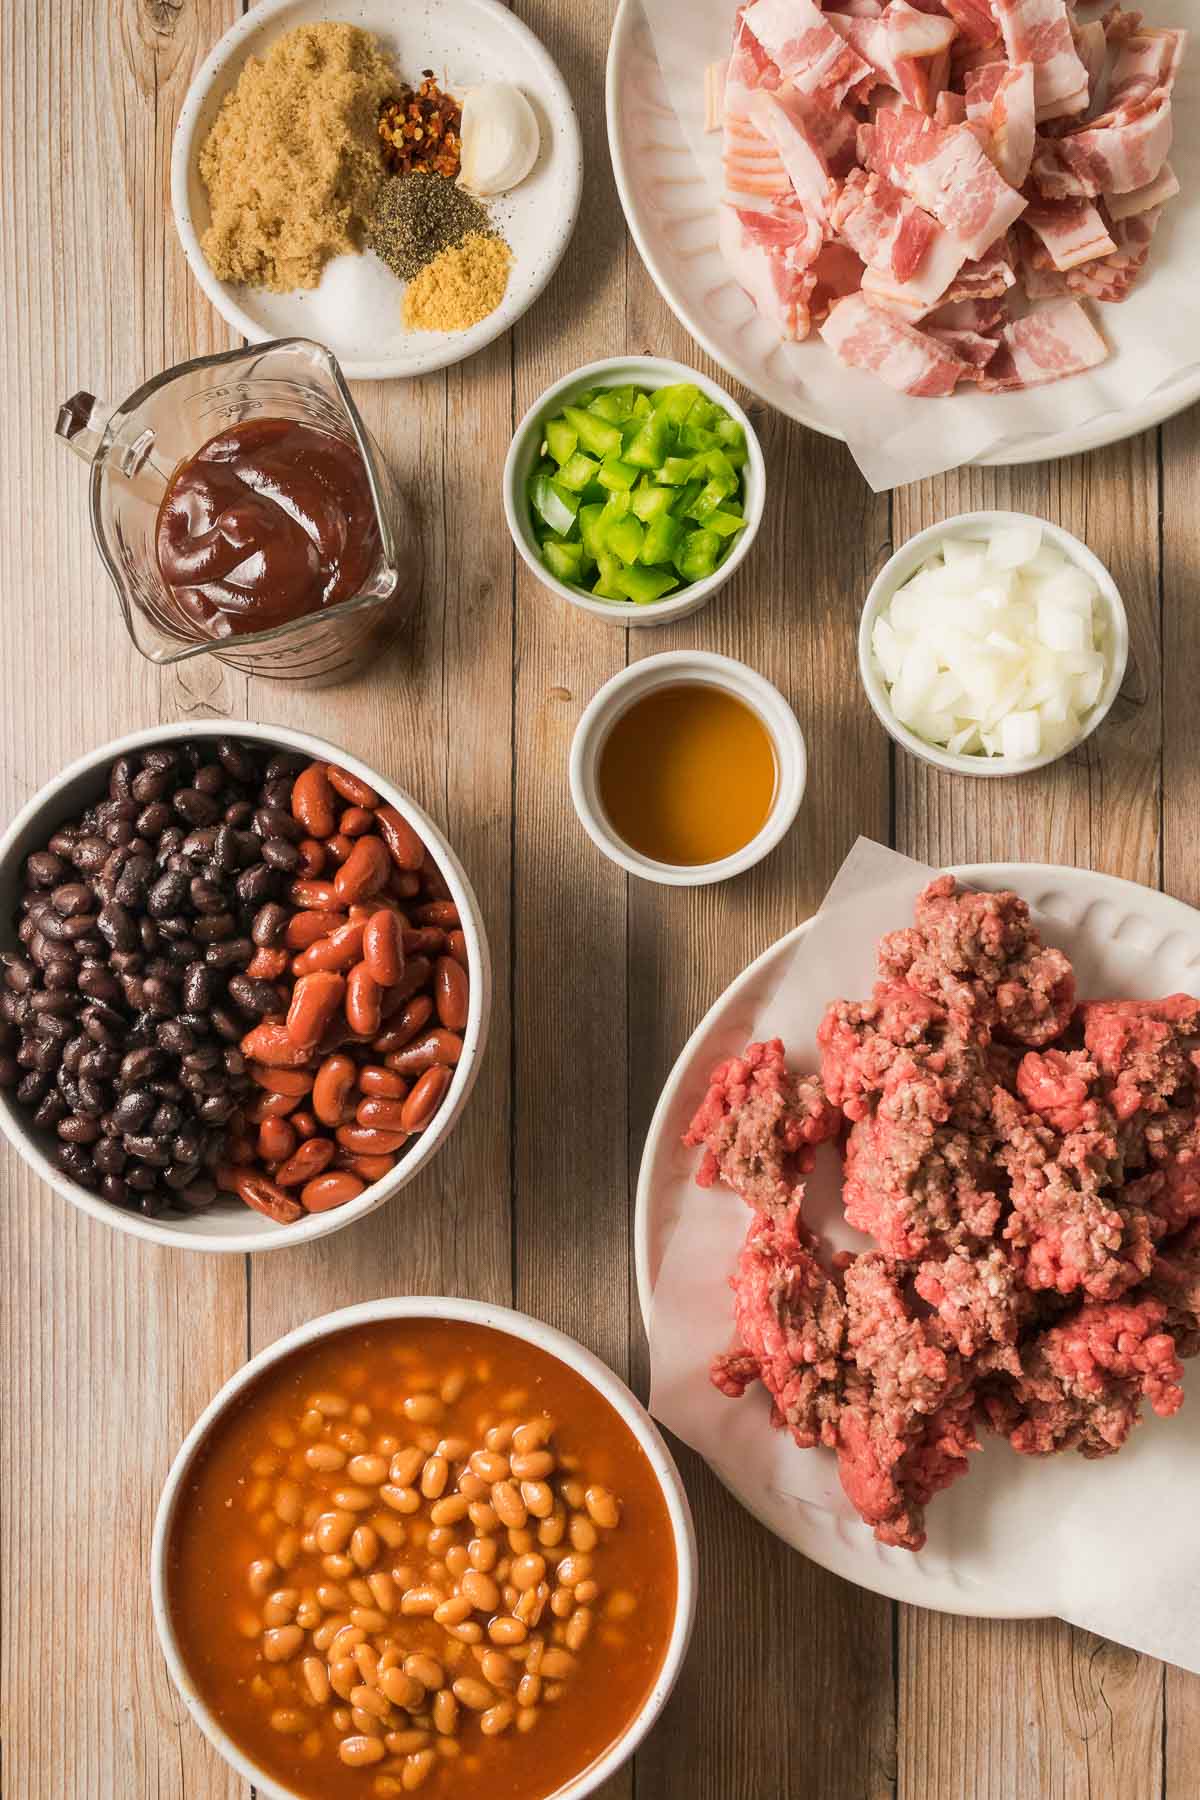 All of the ingredients for cowboy baked beans recipe in prep bowls.